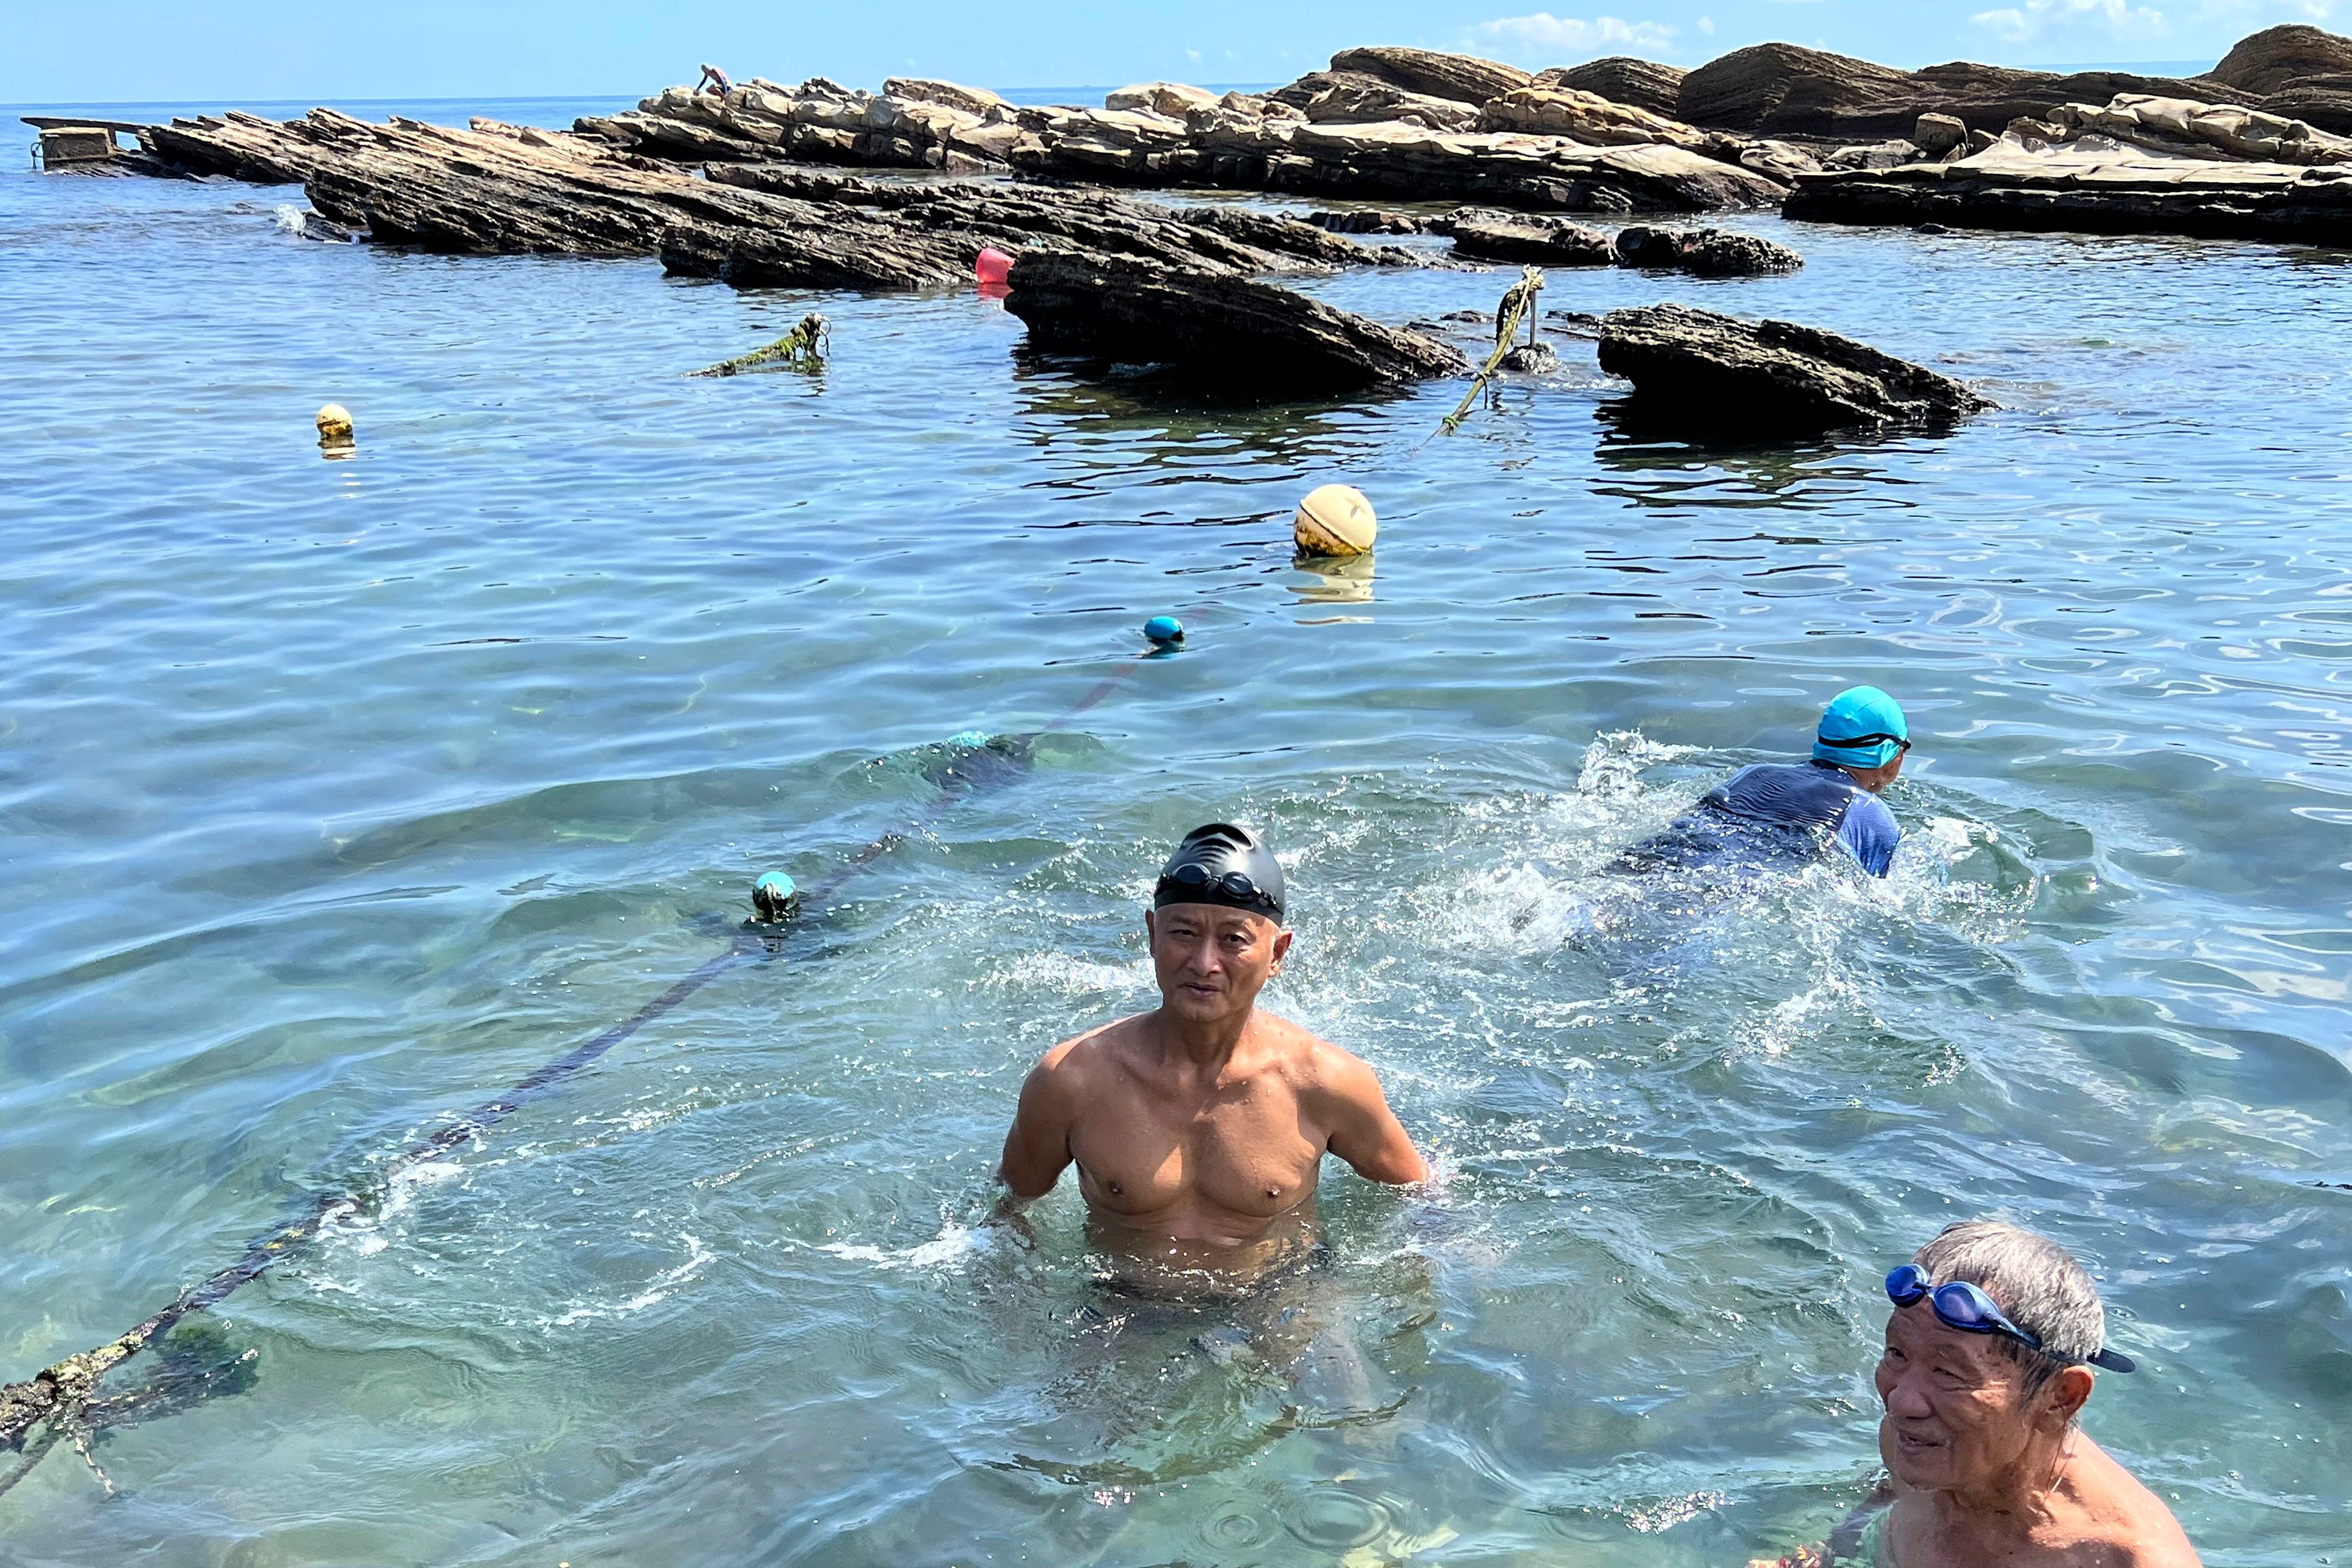 Lu Chuan-hsiong, center, swims along the coast near Keelung in Taiwan, Thursday, Aug. 4, 2022. Lu, 63, who was enjoying his morning swim, says he wasn't worried about the recent China and Taiwan tensions. 